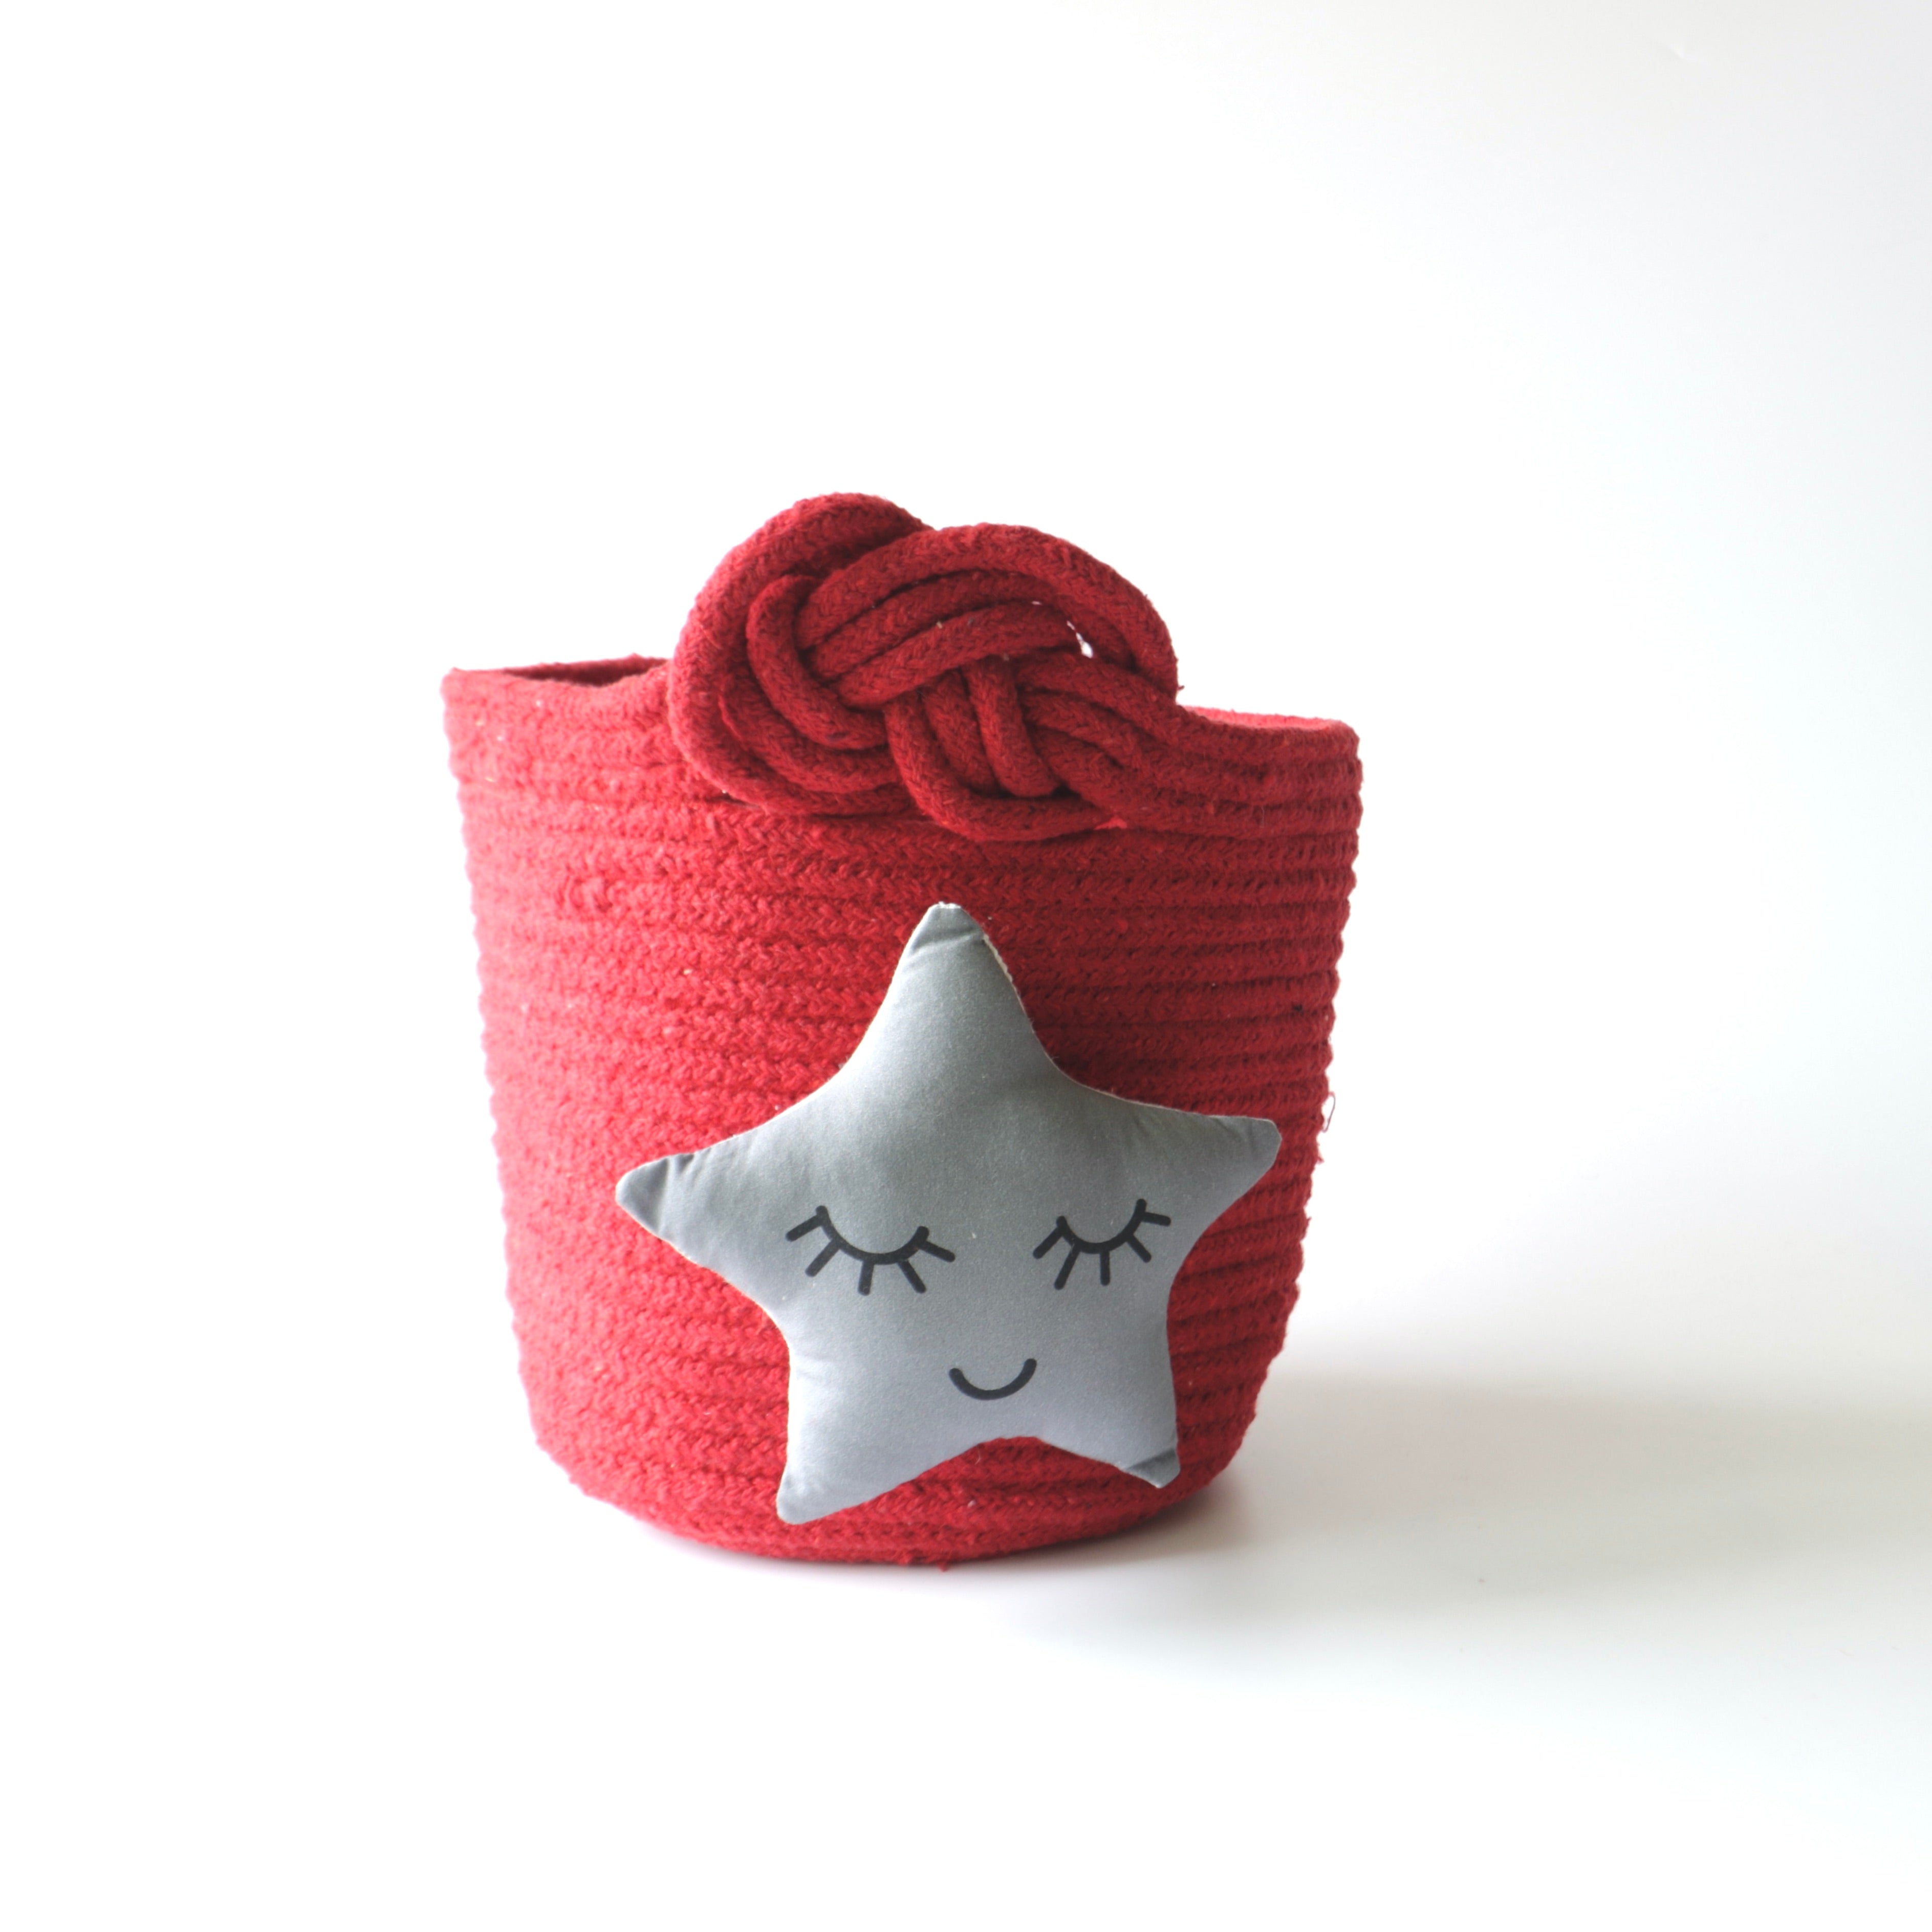 Multipurpose Storage Knotted Basket - Red (Star)